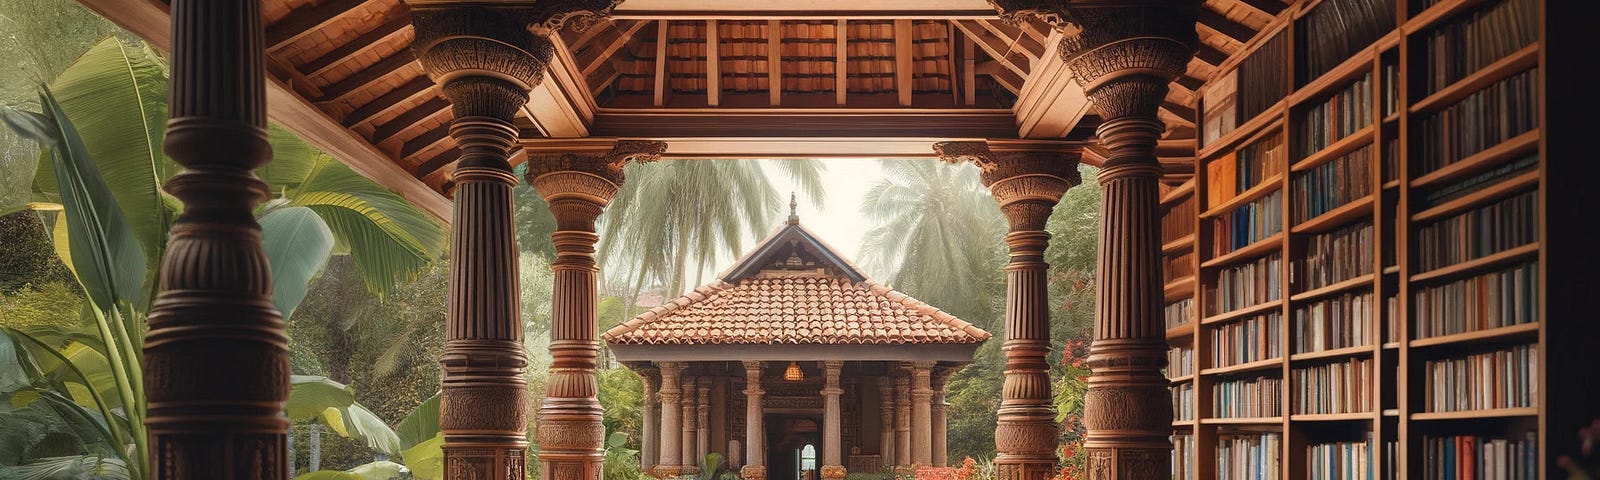 An ancient Indian serene library on a veranda